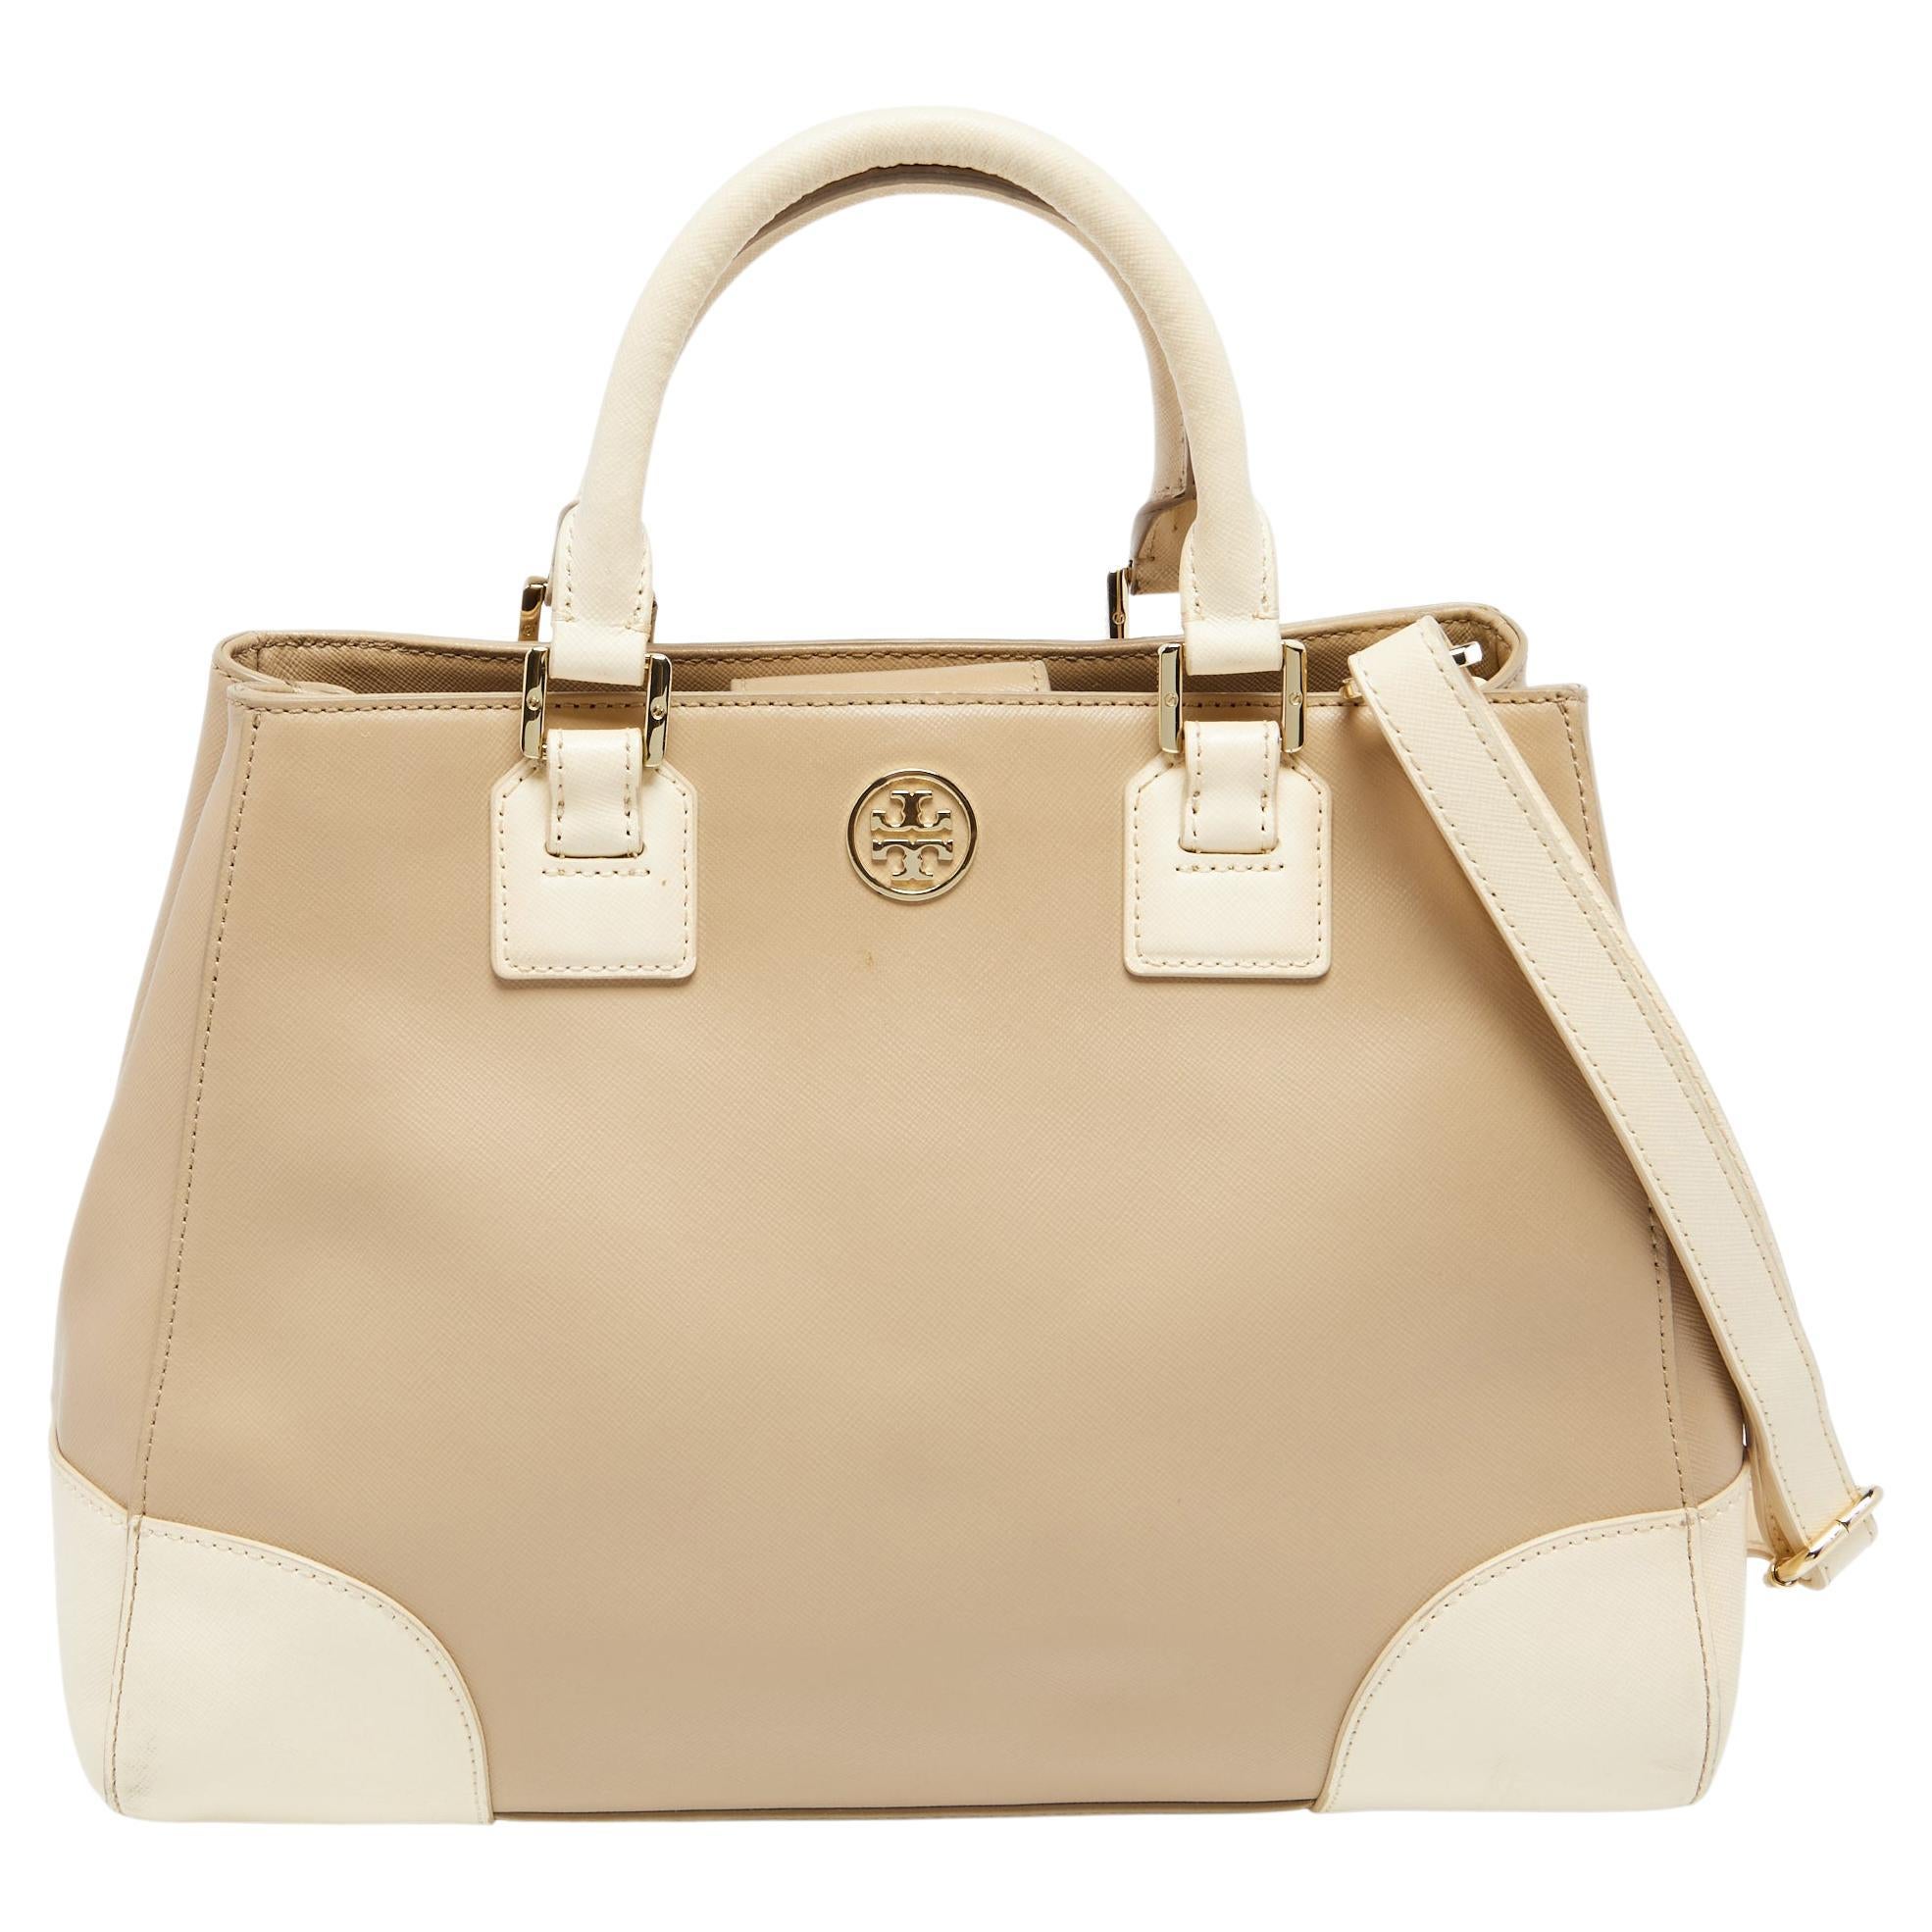 Tory Burch Two Tone Saffiano Lux Leather Robinson Tote Bag in